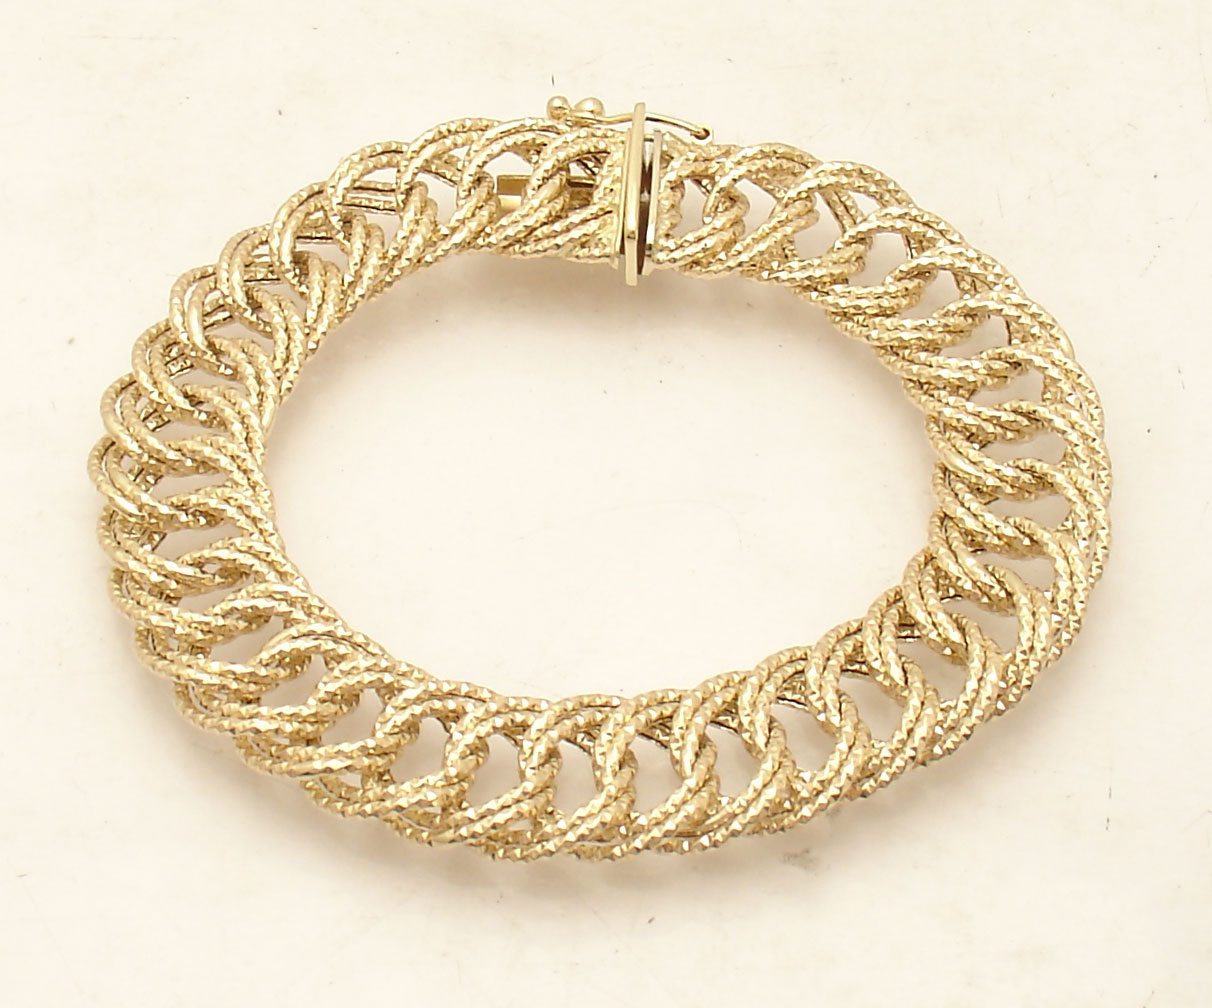 7/" SOLID Diamond Cut Rope Chain Bracelet Lobster Lock REAL 14K Yellow Gold